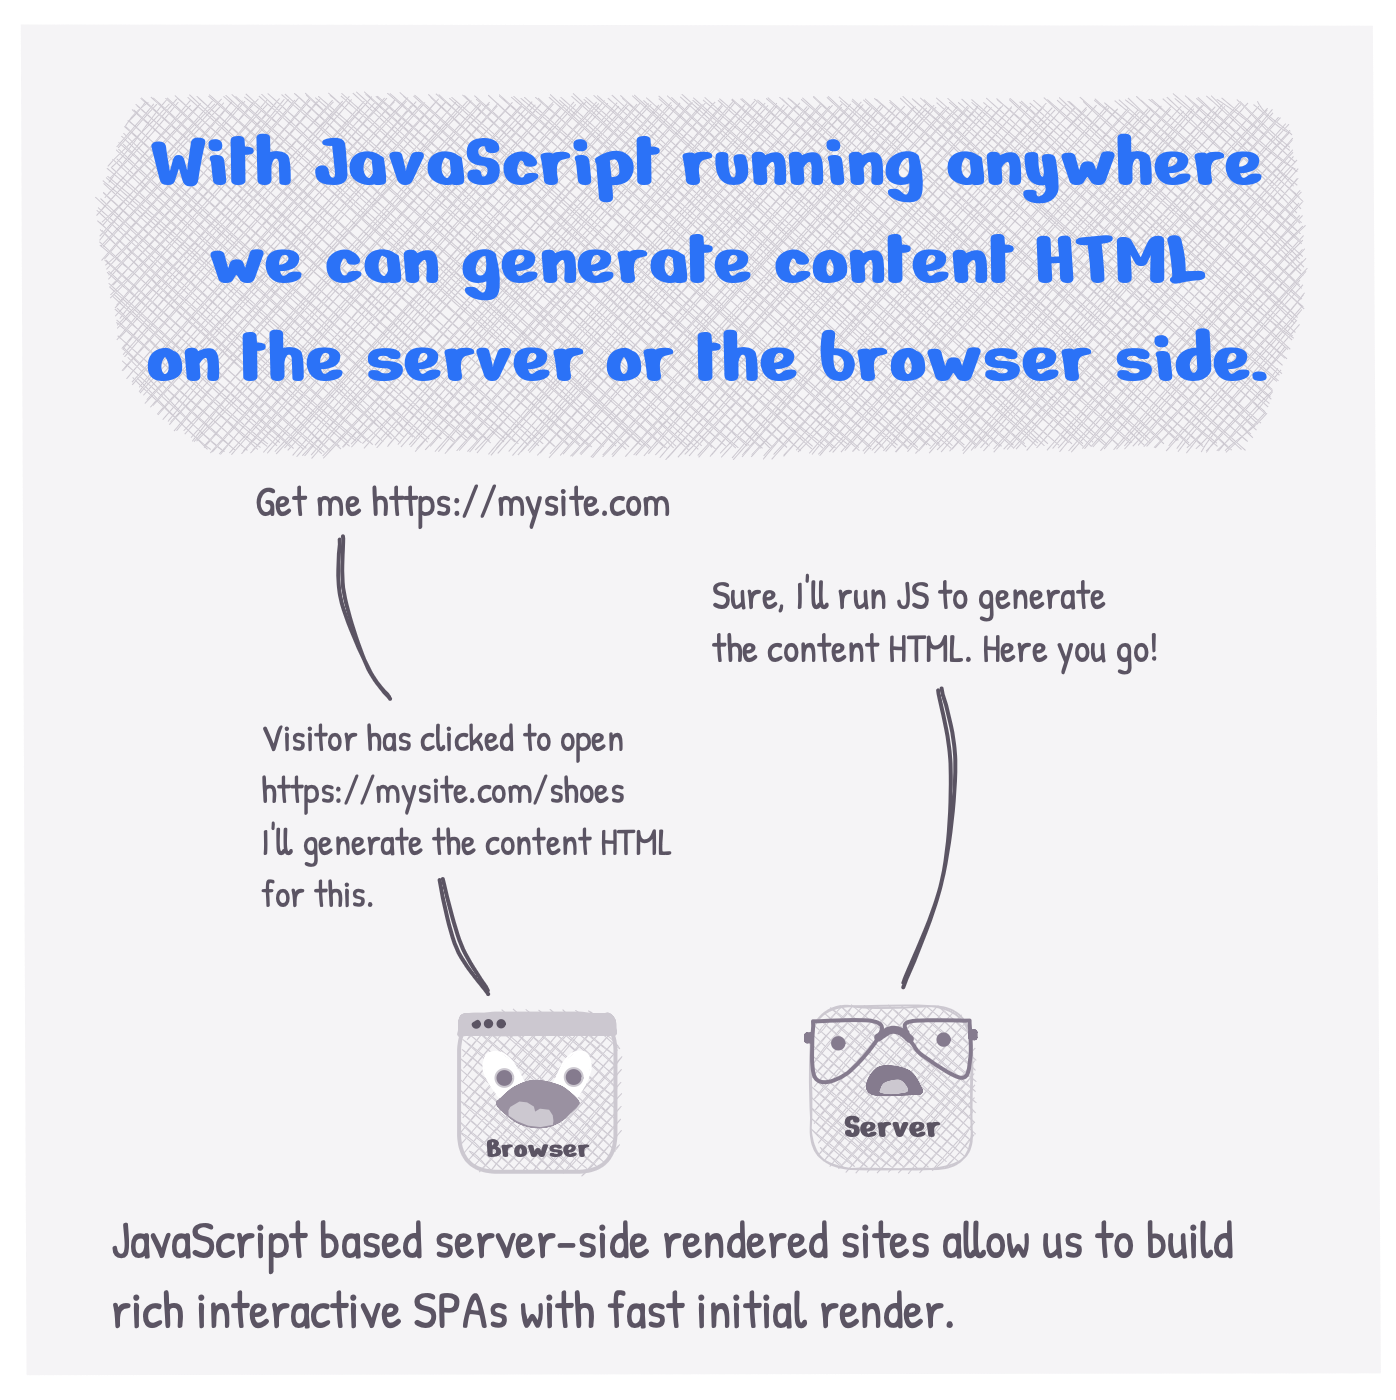 How is Server-side rendering with JavaScript different? - II